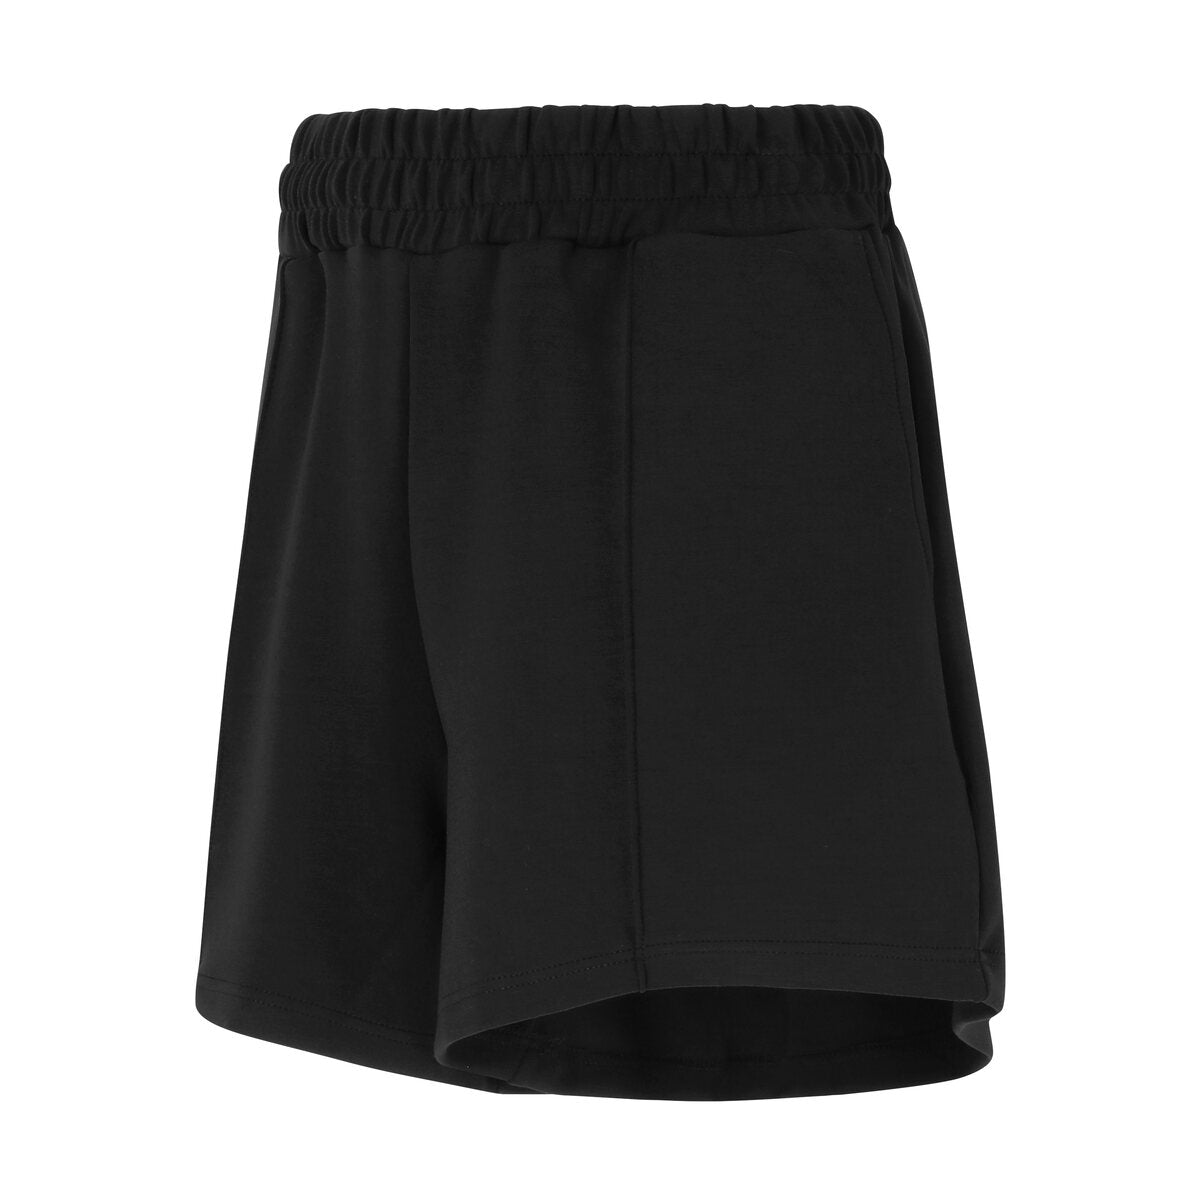 Athlecia Jacey Womenswear High Waisted Lounge Shorts - Black 6 Shaws Department Stores